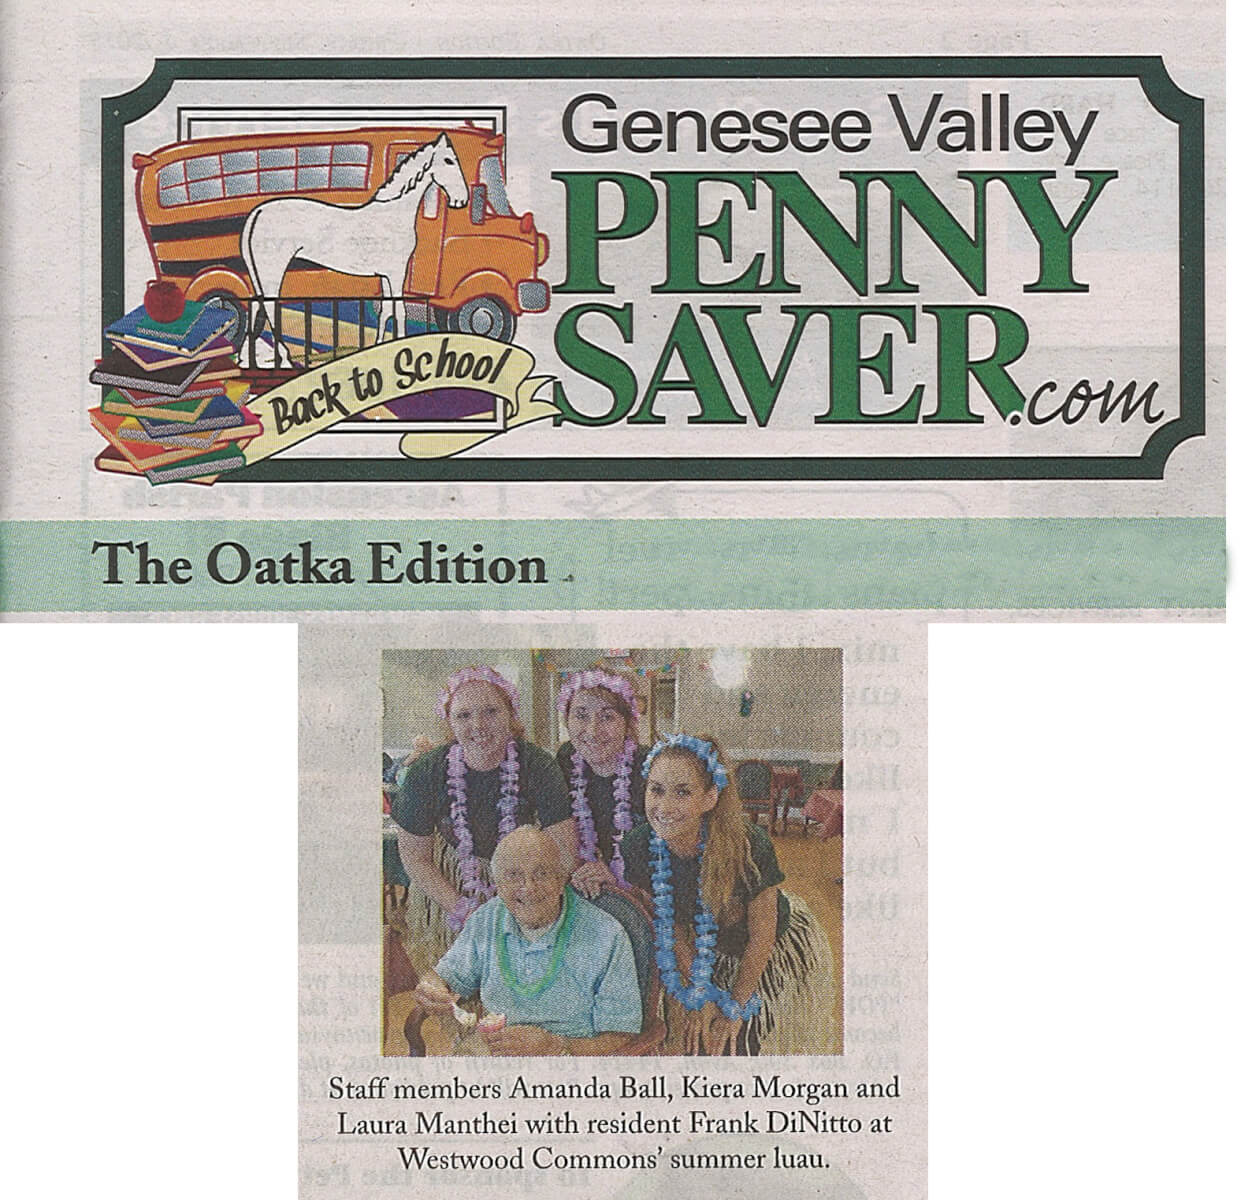 Westwood Commons Assisted Living Luau photo in the Genesee Valley Penny Saver September 4, 2015